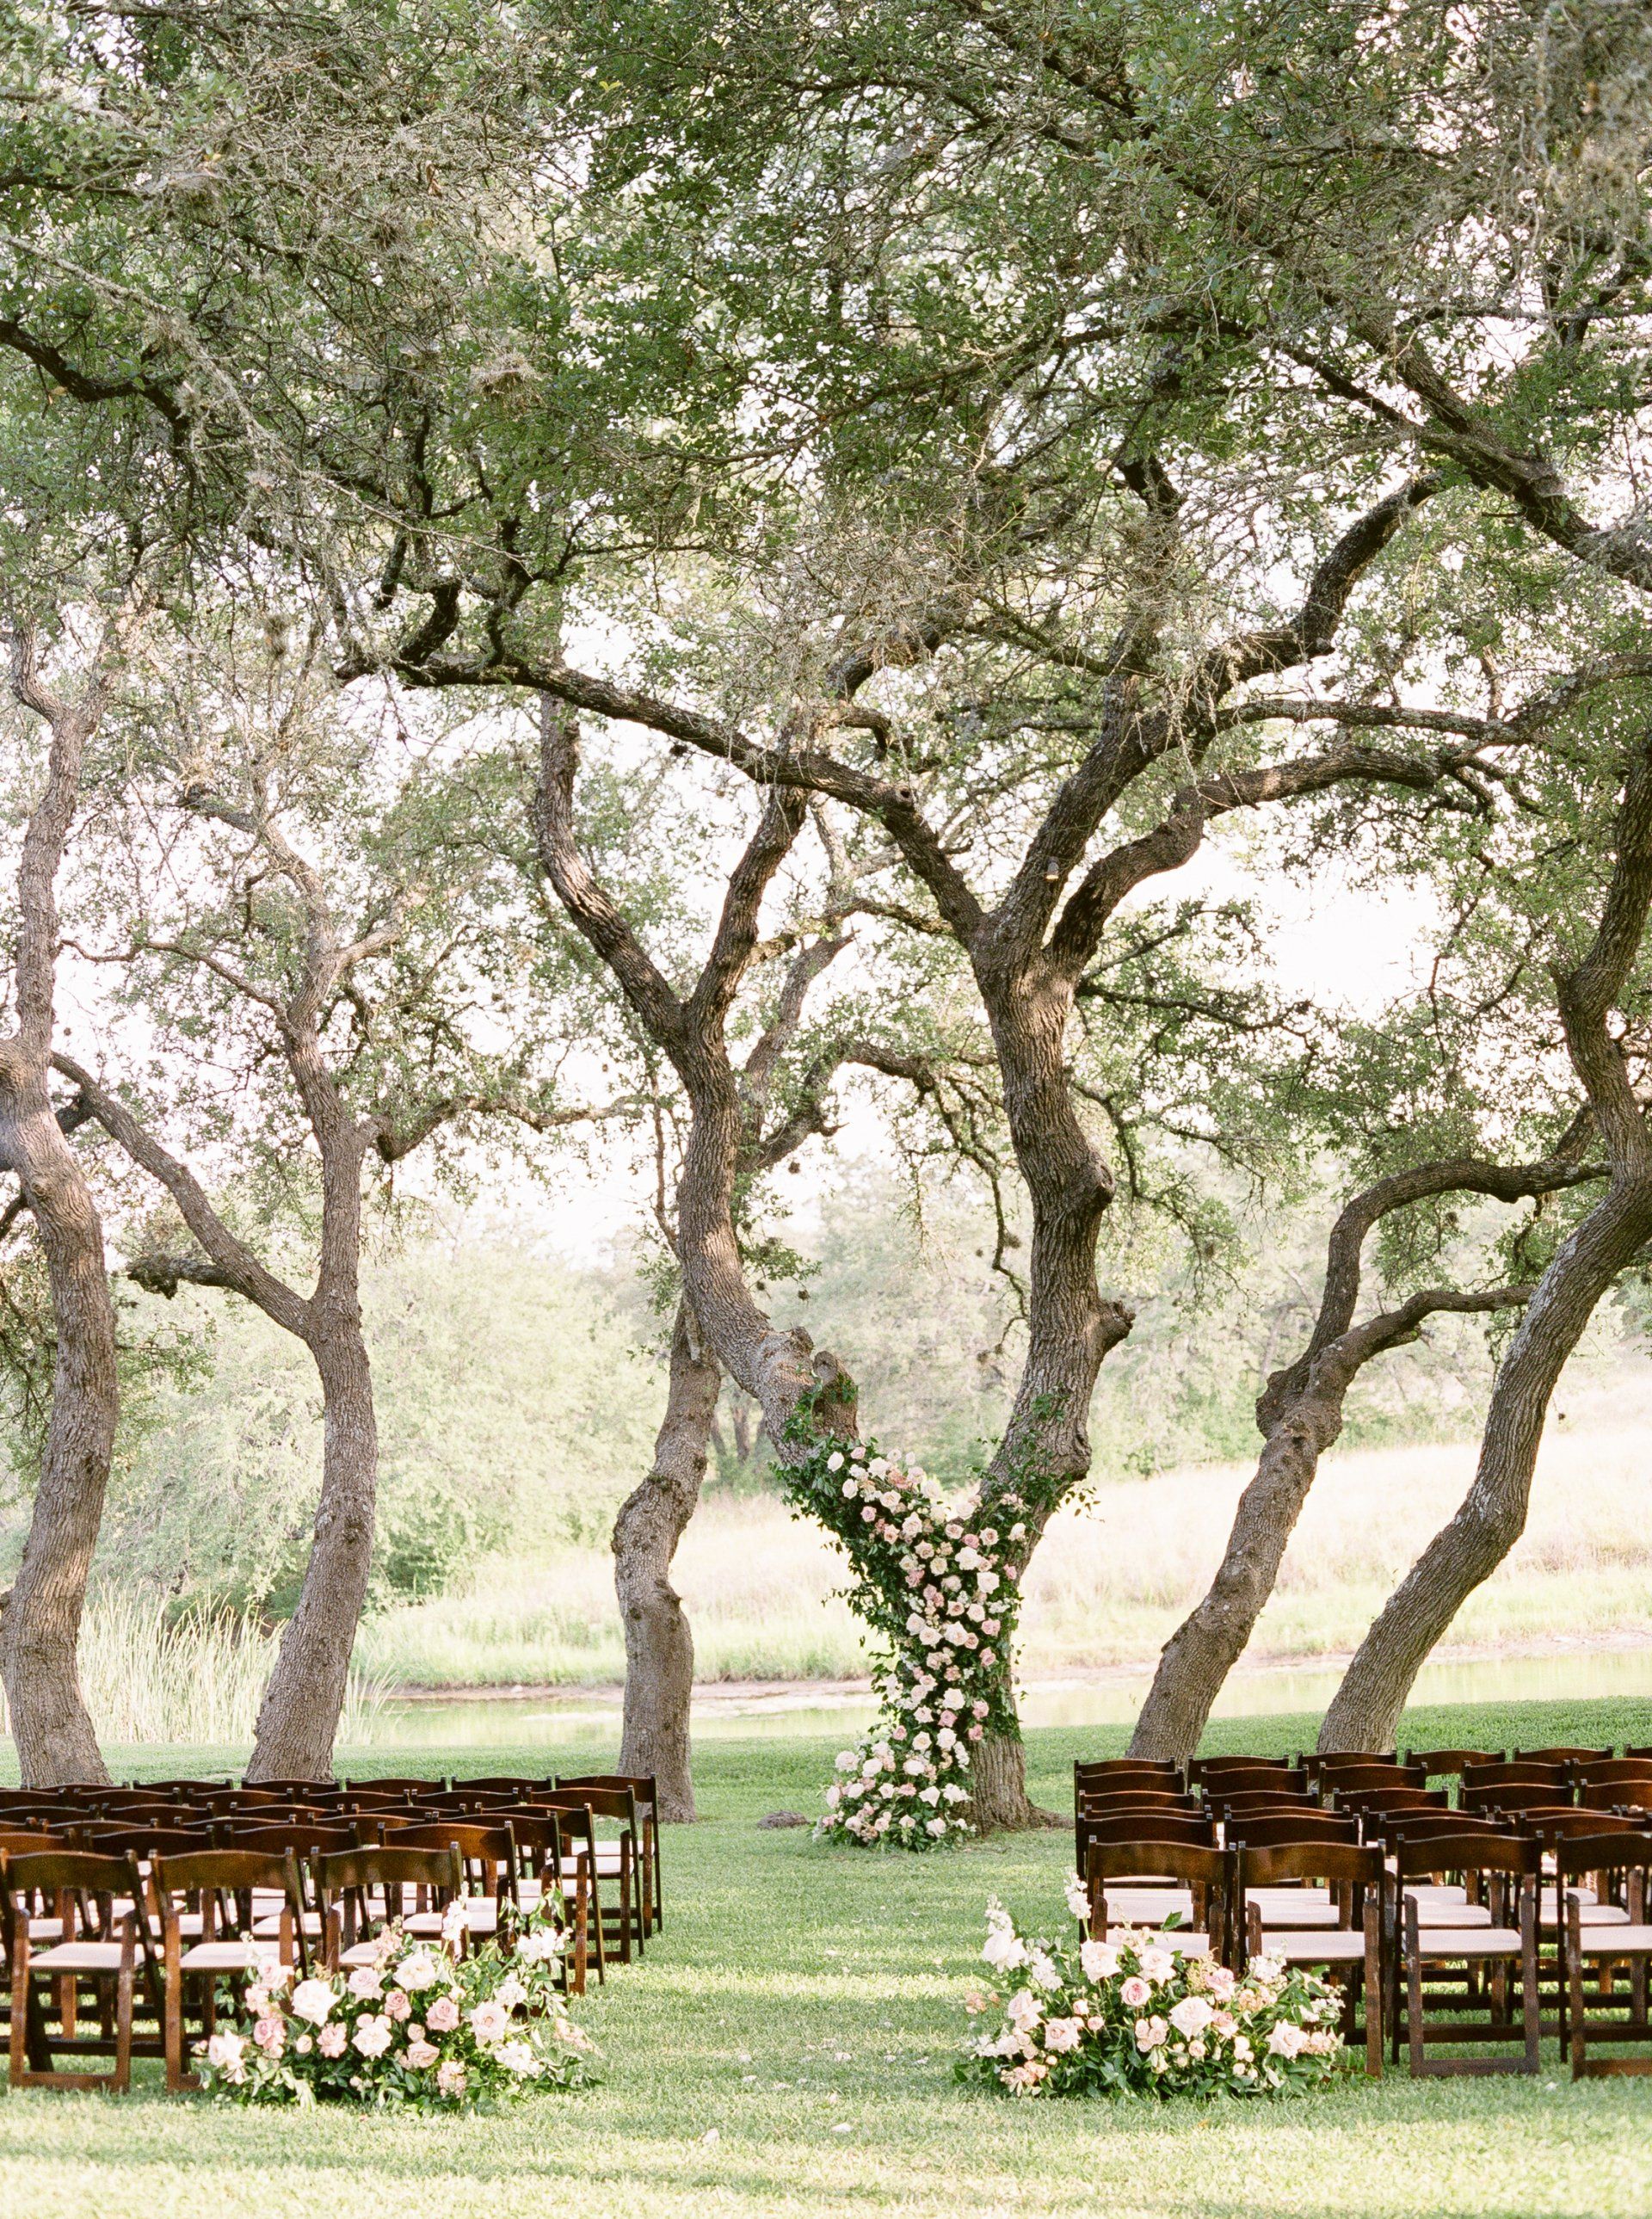 outdoor wedding ceremony in Austin Texas The Addison Grove Austin, Texas Wedding Venue in Hill Country Texas